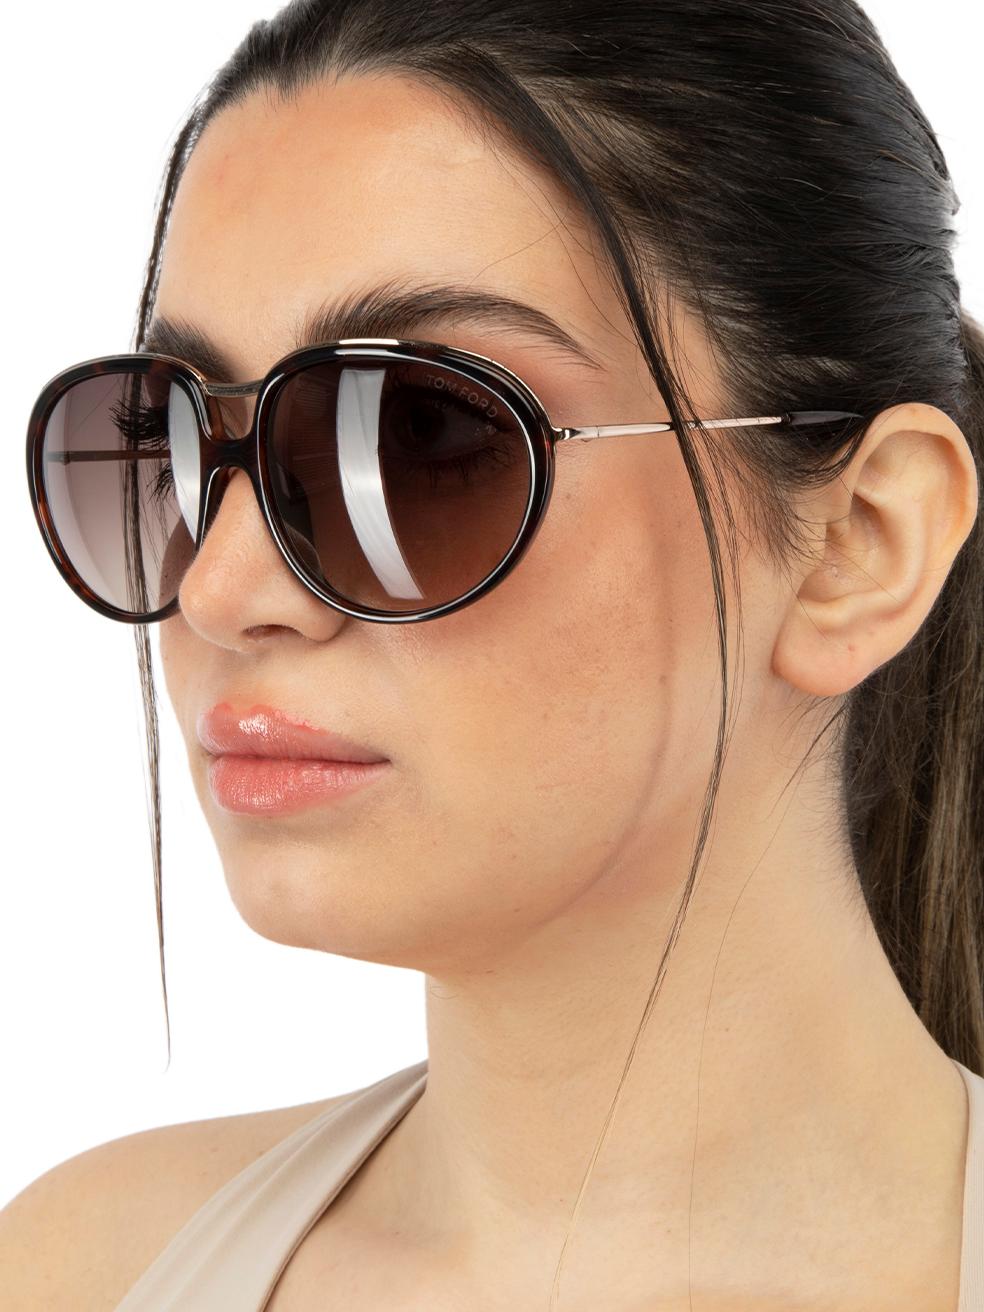 CONDITION is New with tagson this brand new Tom Ford designer item. This item comes with original packaging.
 
 
 
 Details
 
 
 Model: FT0281
 
 Dark Havana
 
 Acetate
 
 Aviator Sunglasses
 
 Gradient Brown Lens
 
 Full-Rim
 
 Tortoiseshell